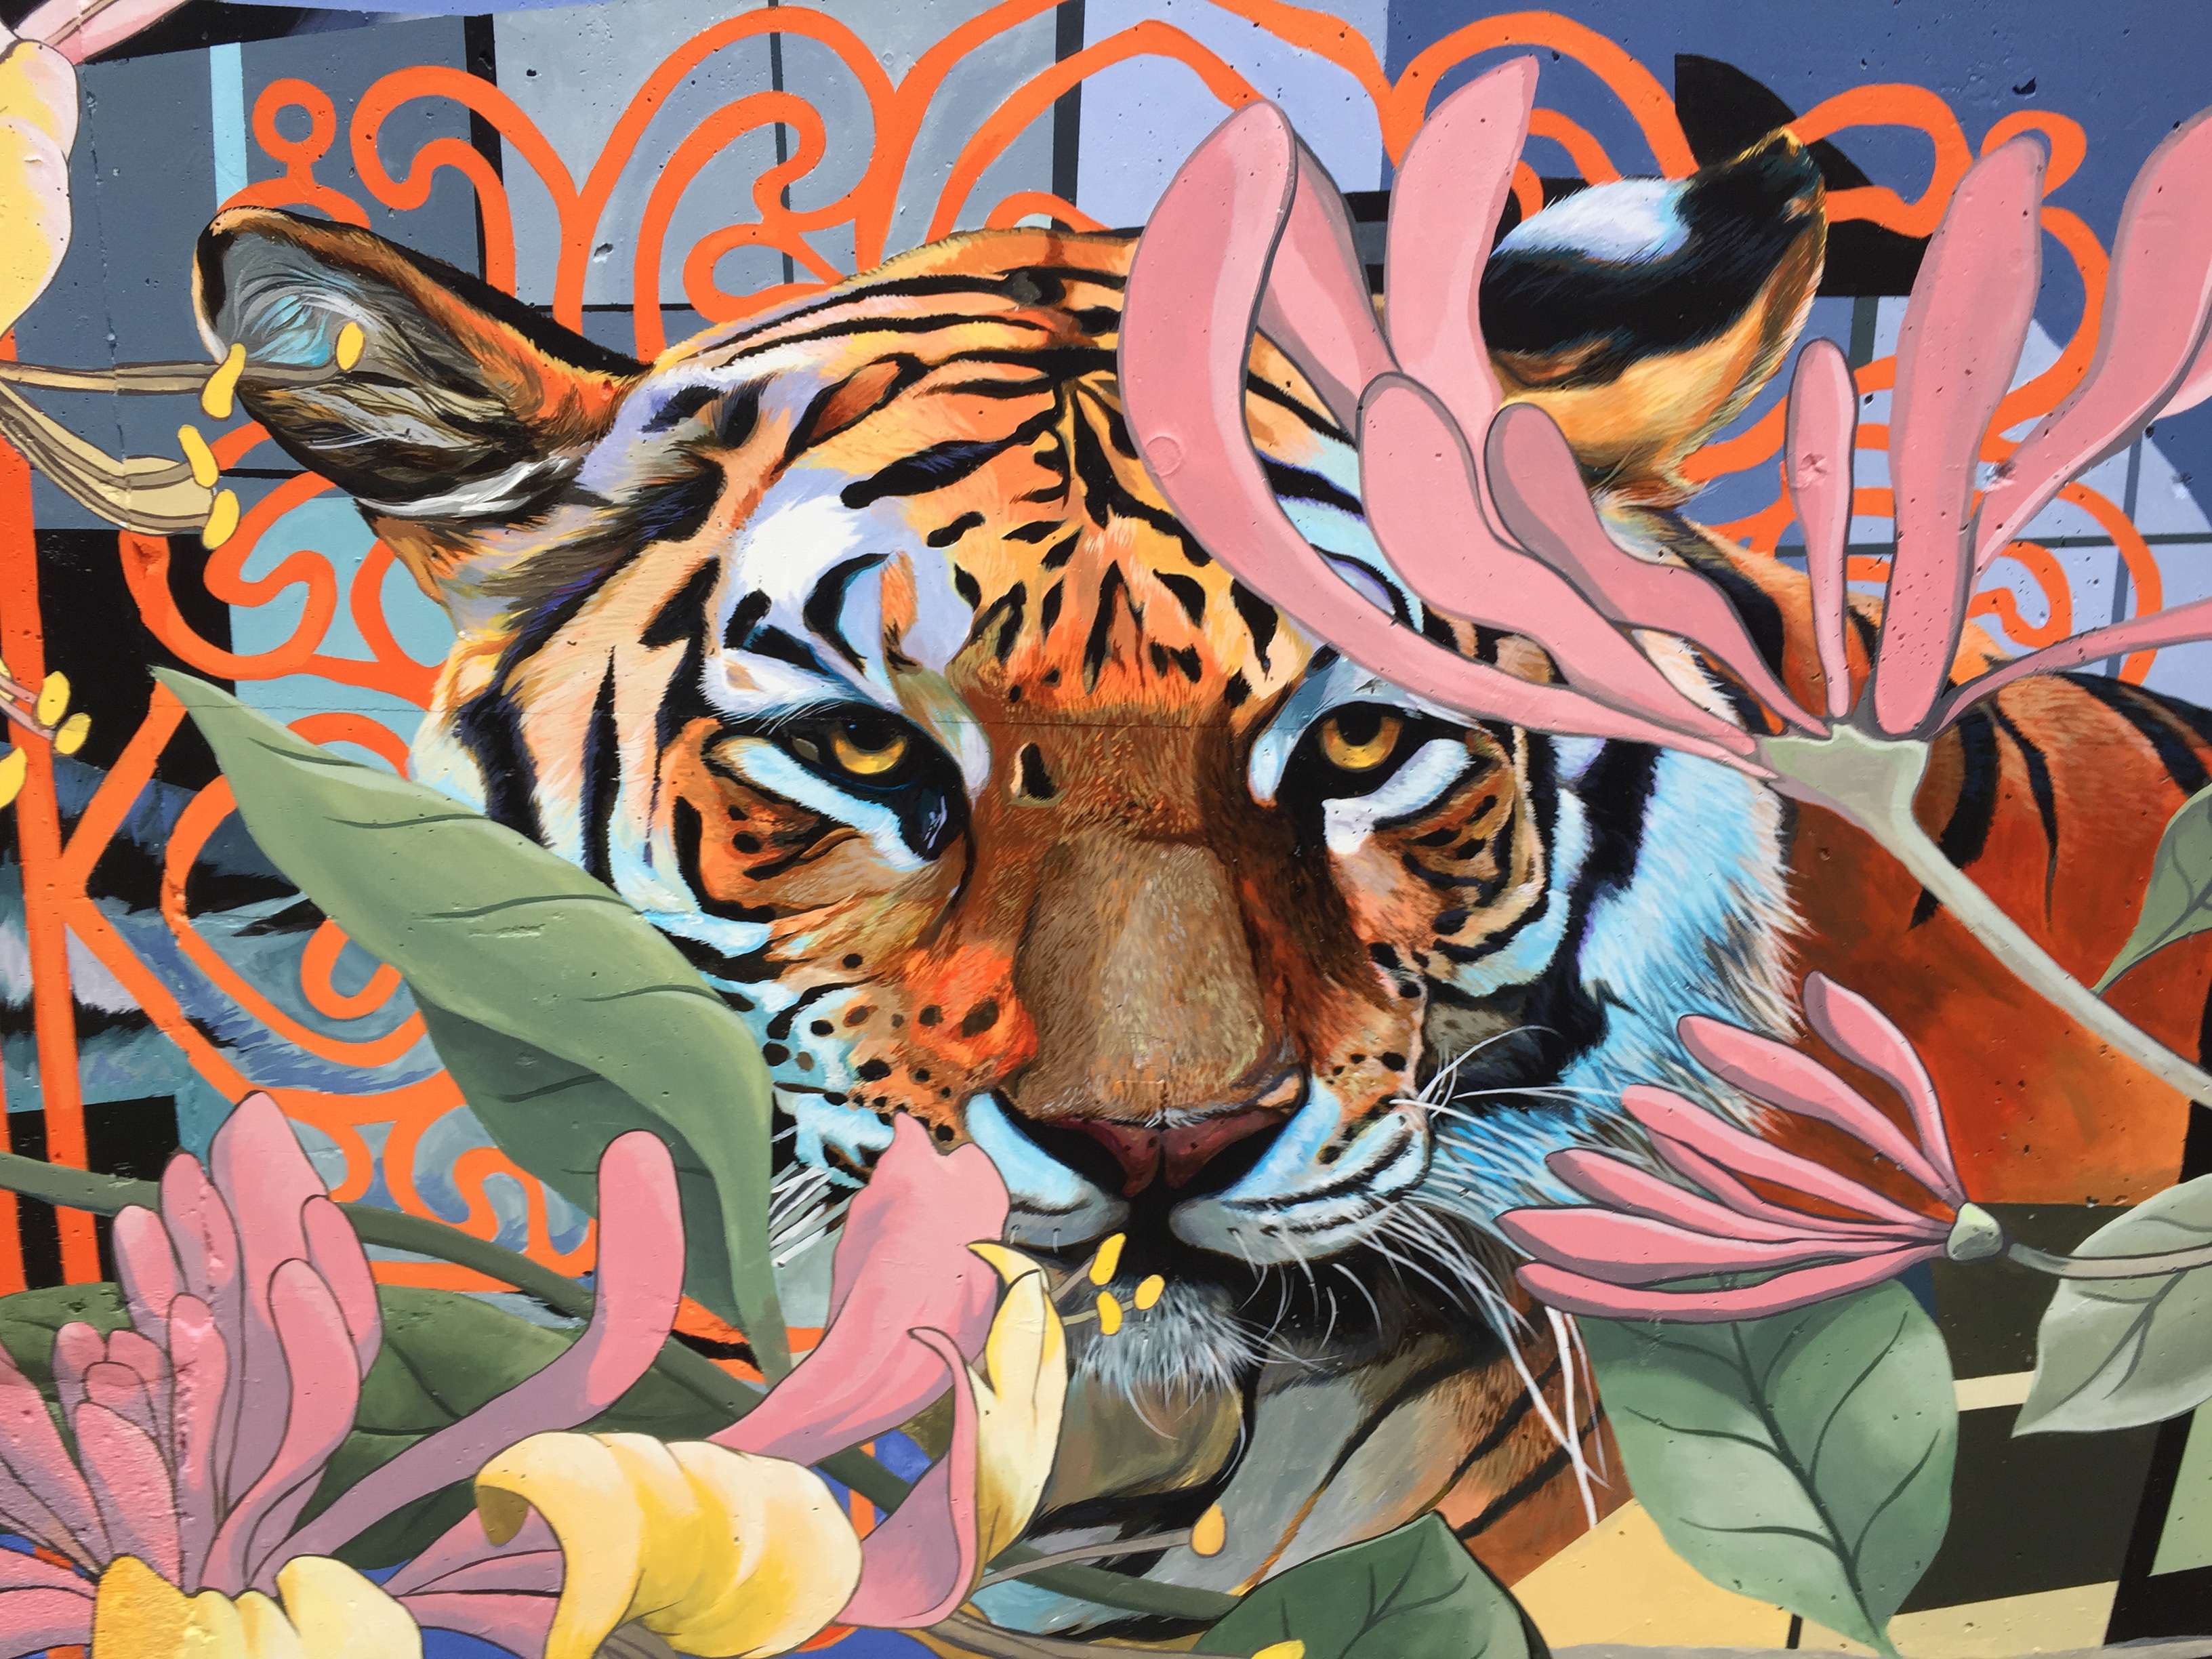 A photorealistic painting of a tiger is surrounded by faded pink and yellow flowers. In the background, an organic orange line pattern surrounds the head of the tiger.